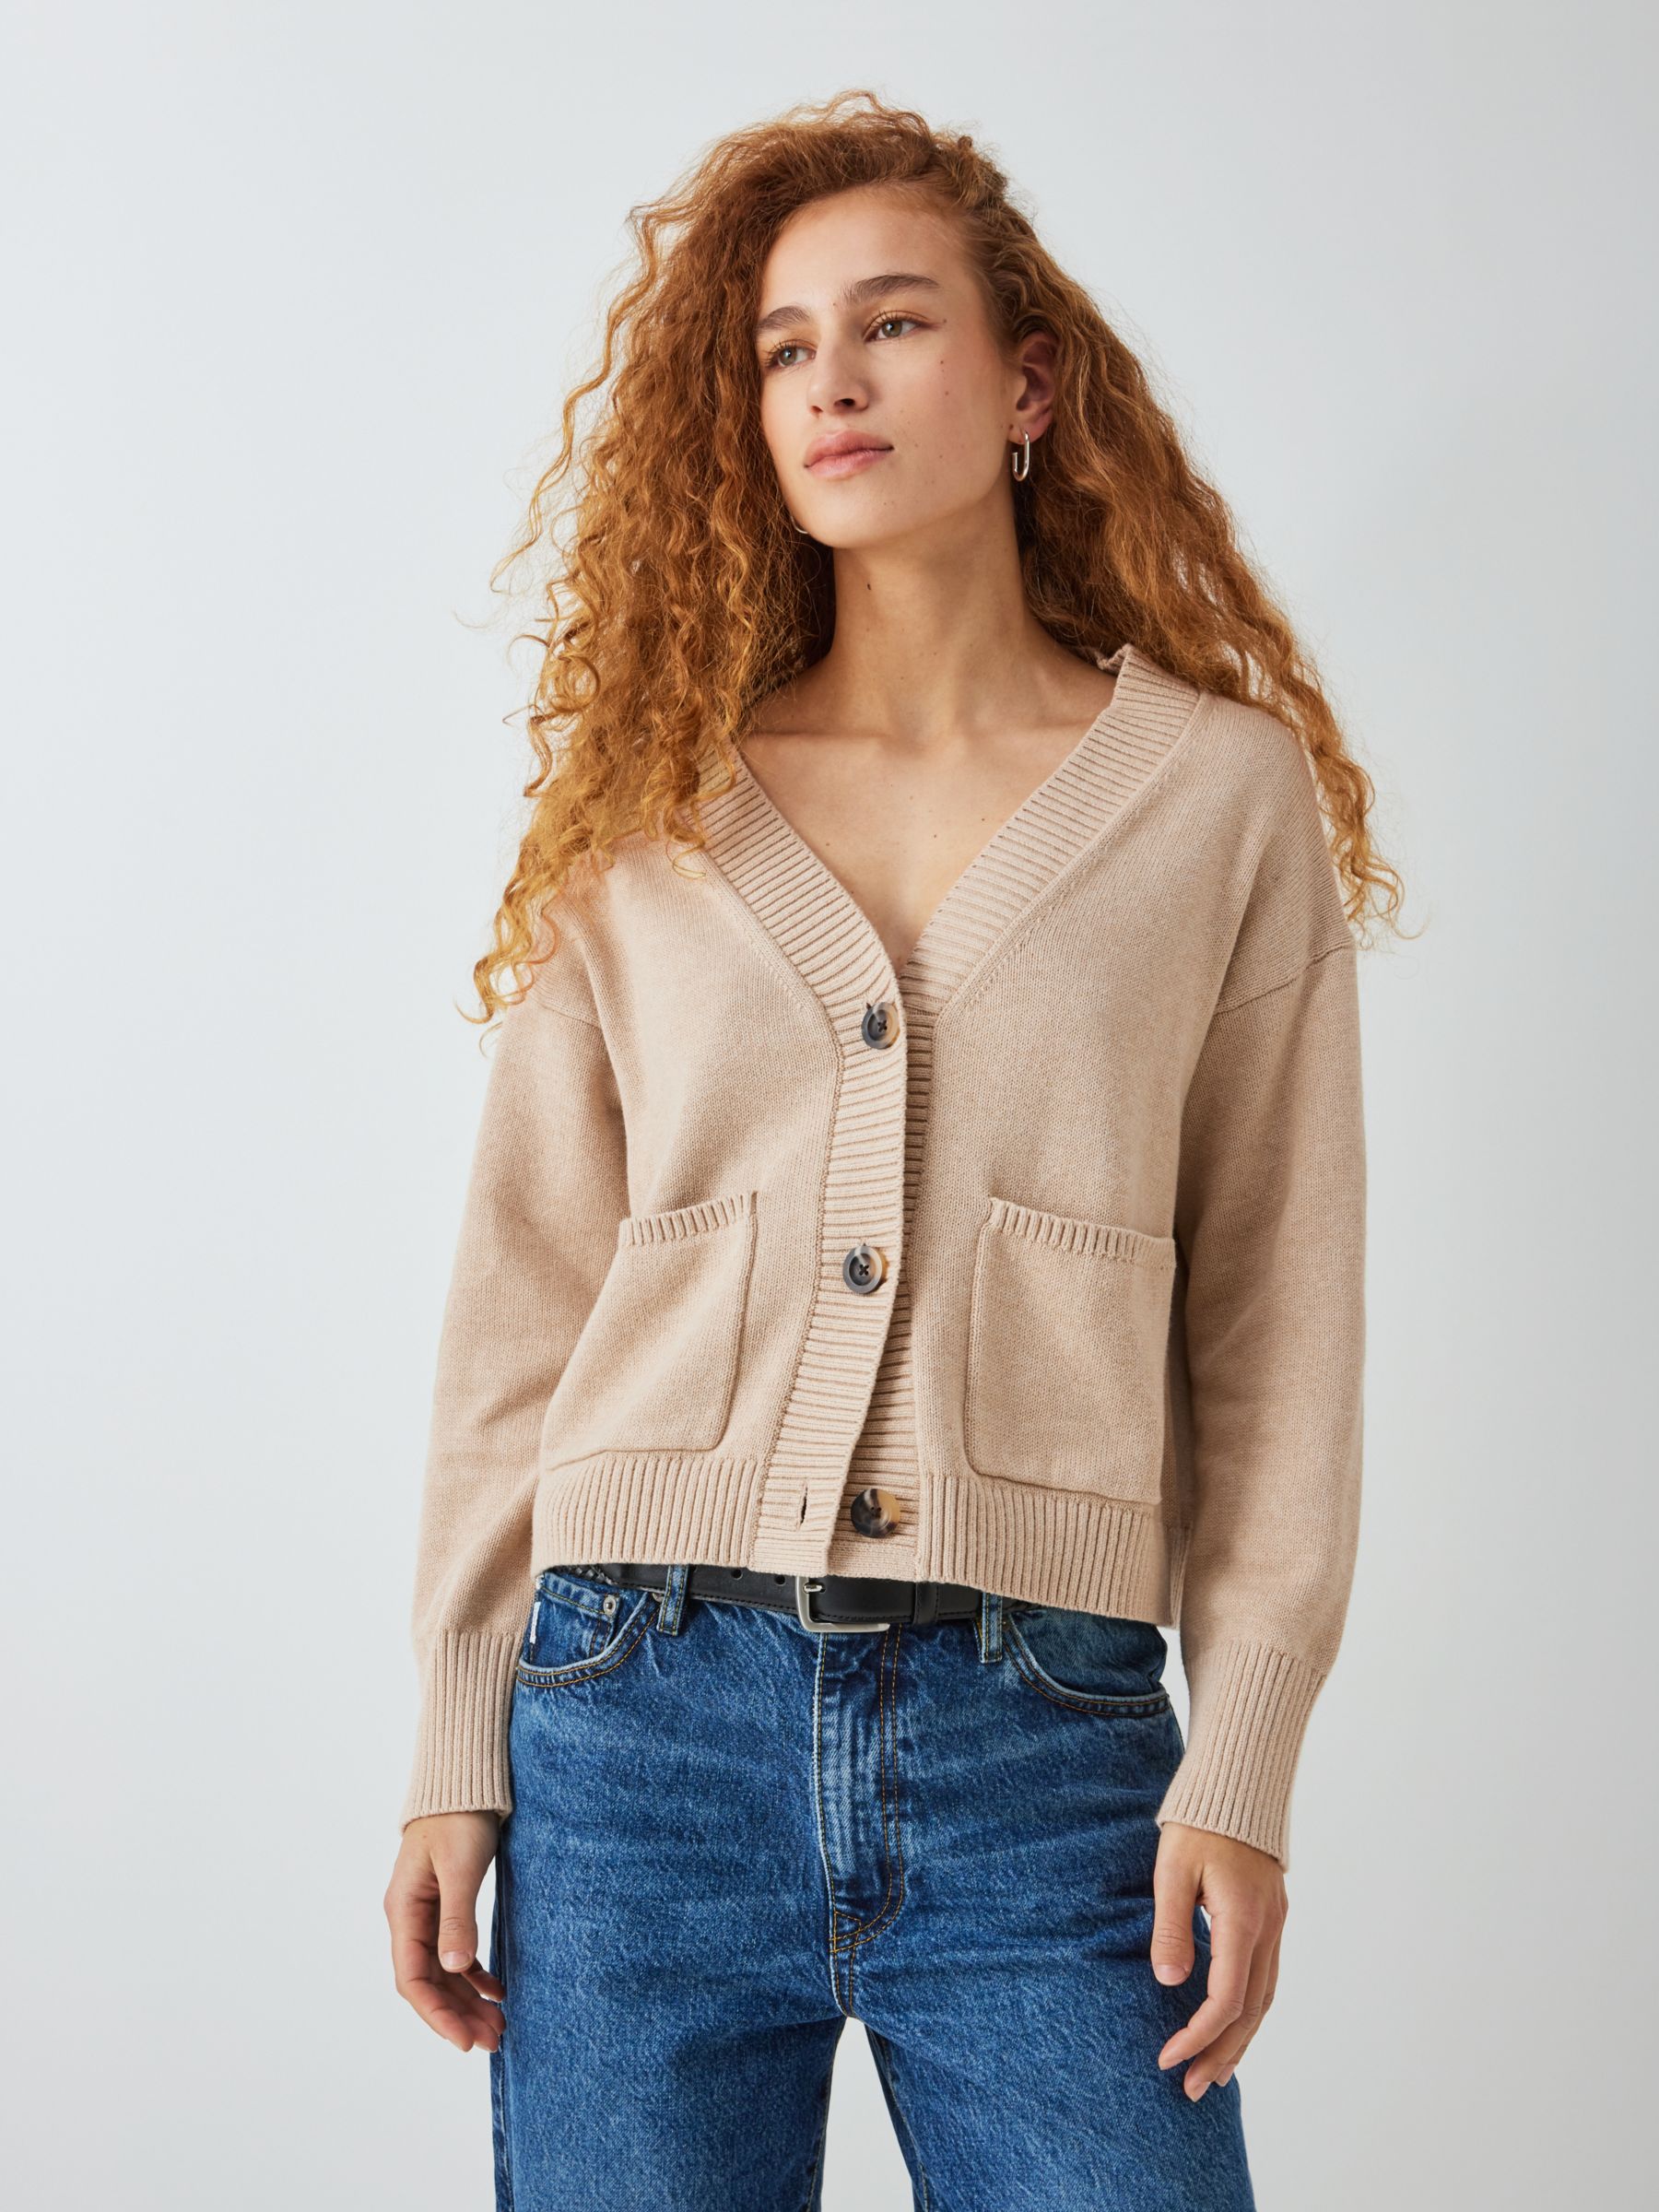 John Lewis ANYDAY Patch Pocket Cardigan, Oatmeal, S